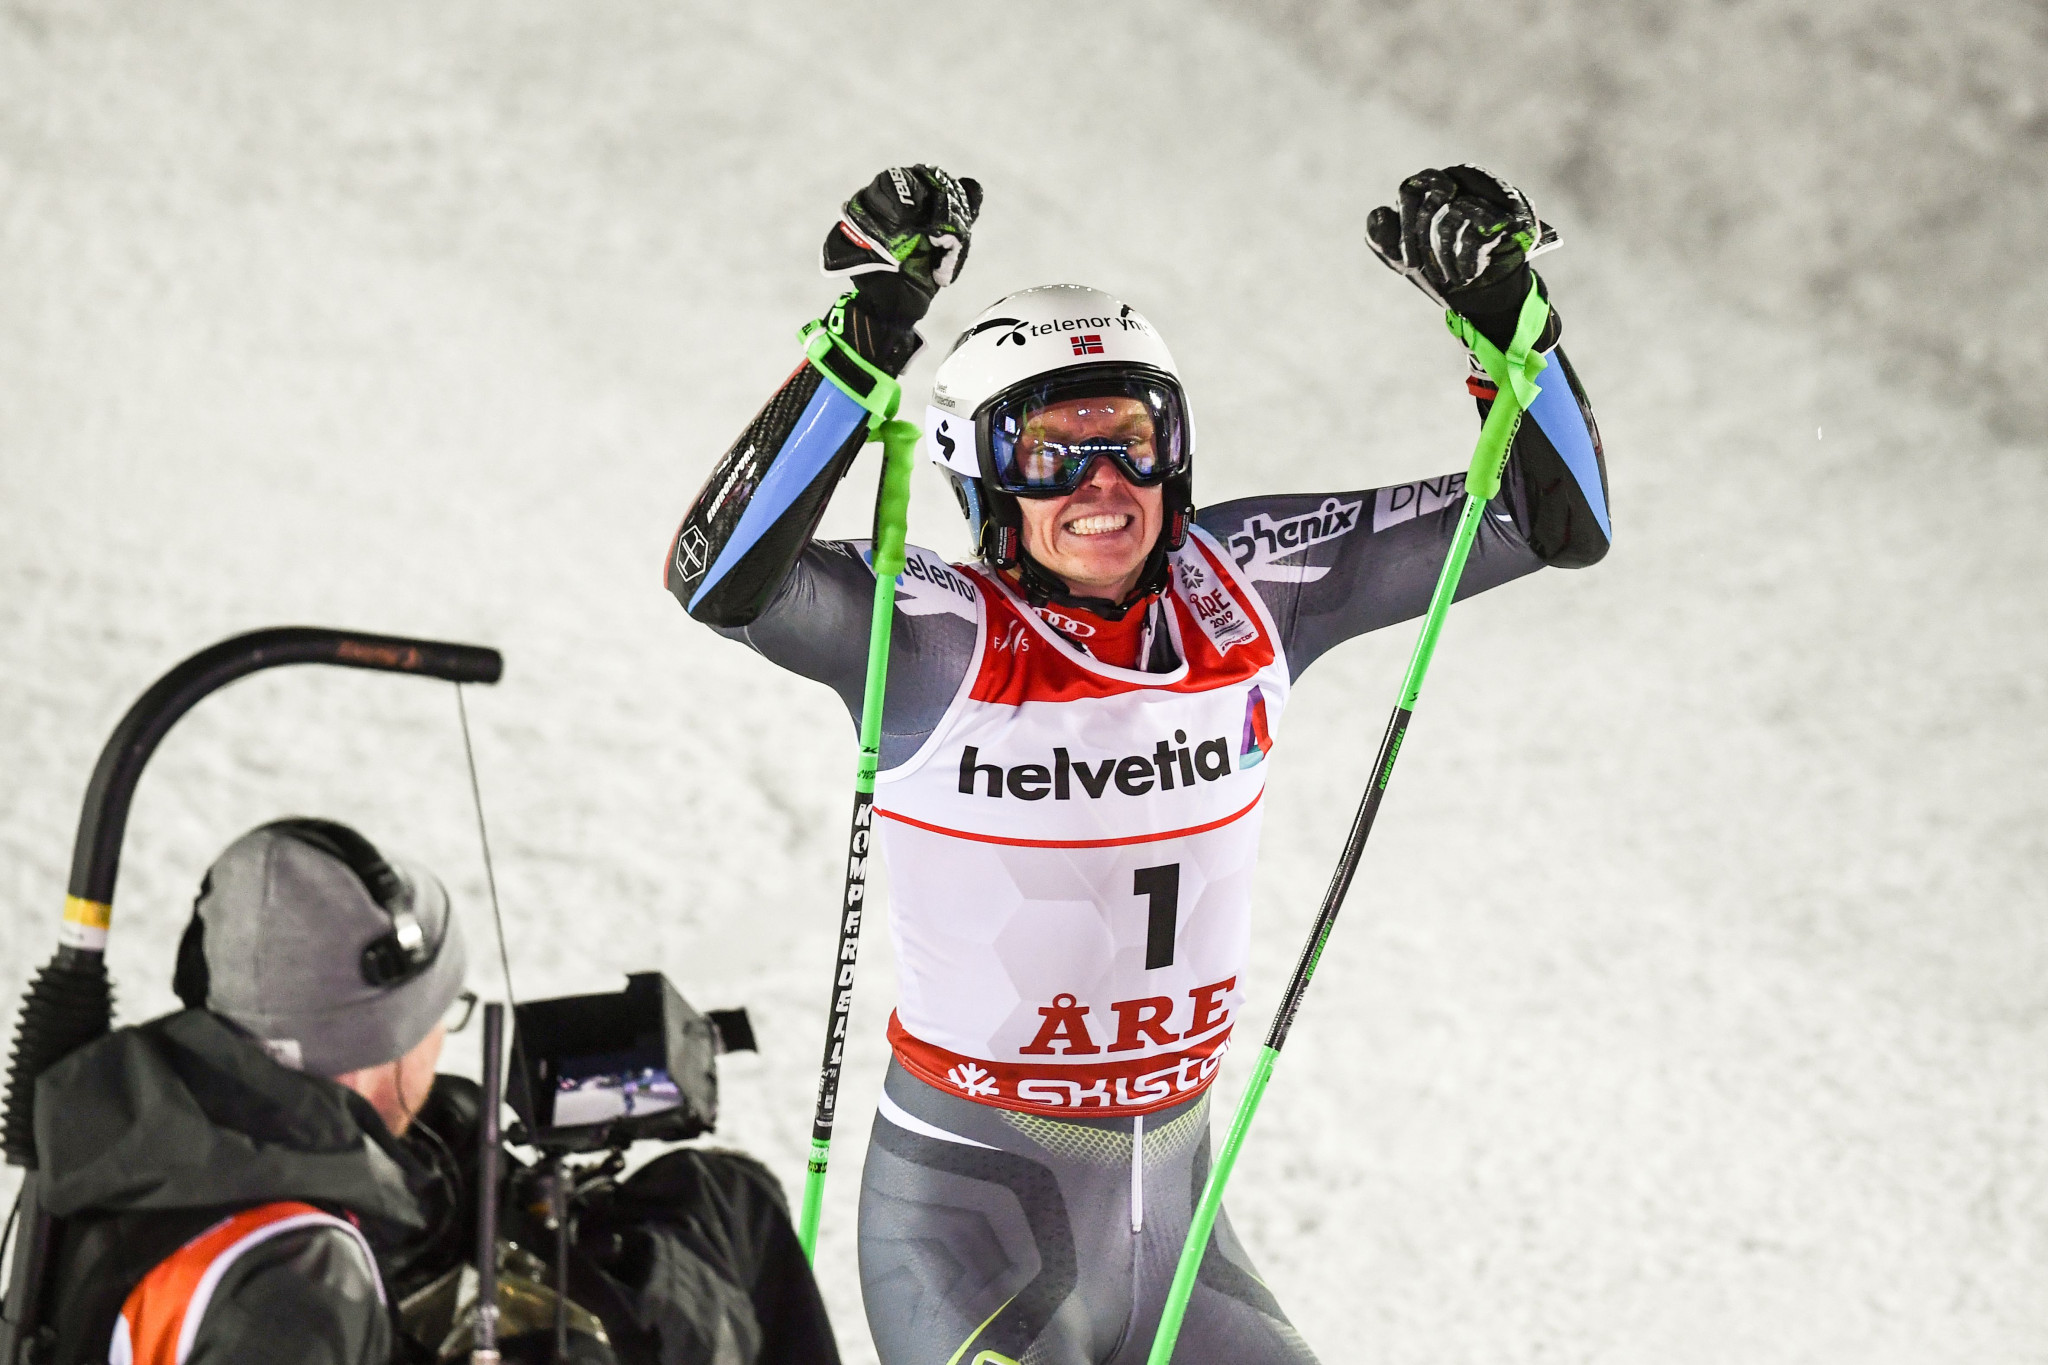 Norway's Henrik Kristoffersen produced a sensational second run to claim the men’s giant slalom gold medal at the FIS Alpine World Ski Championships in Åre in Sweden ©Getty Images